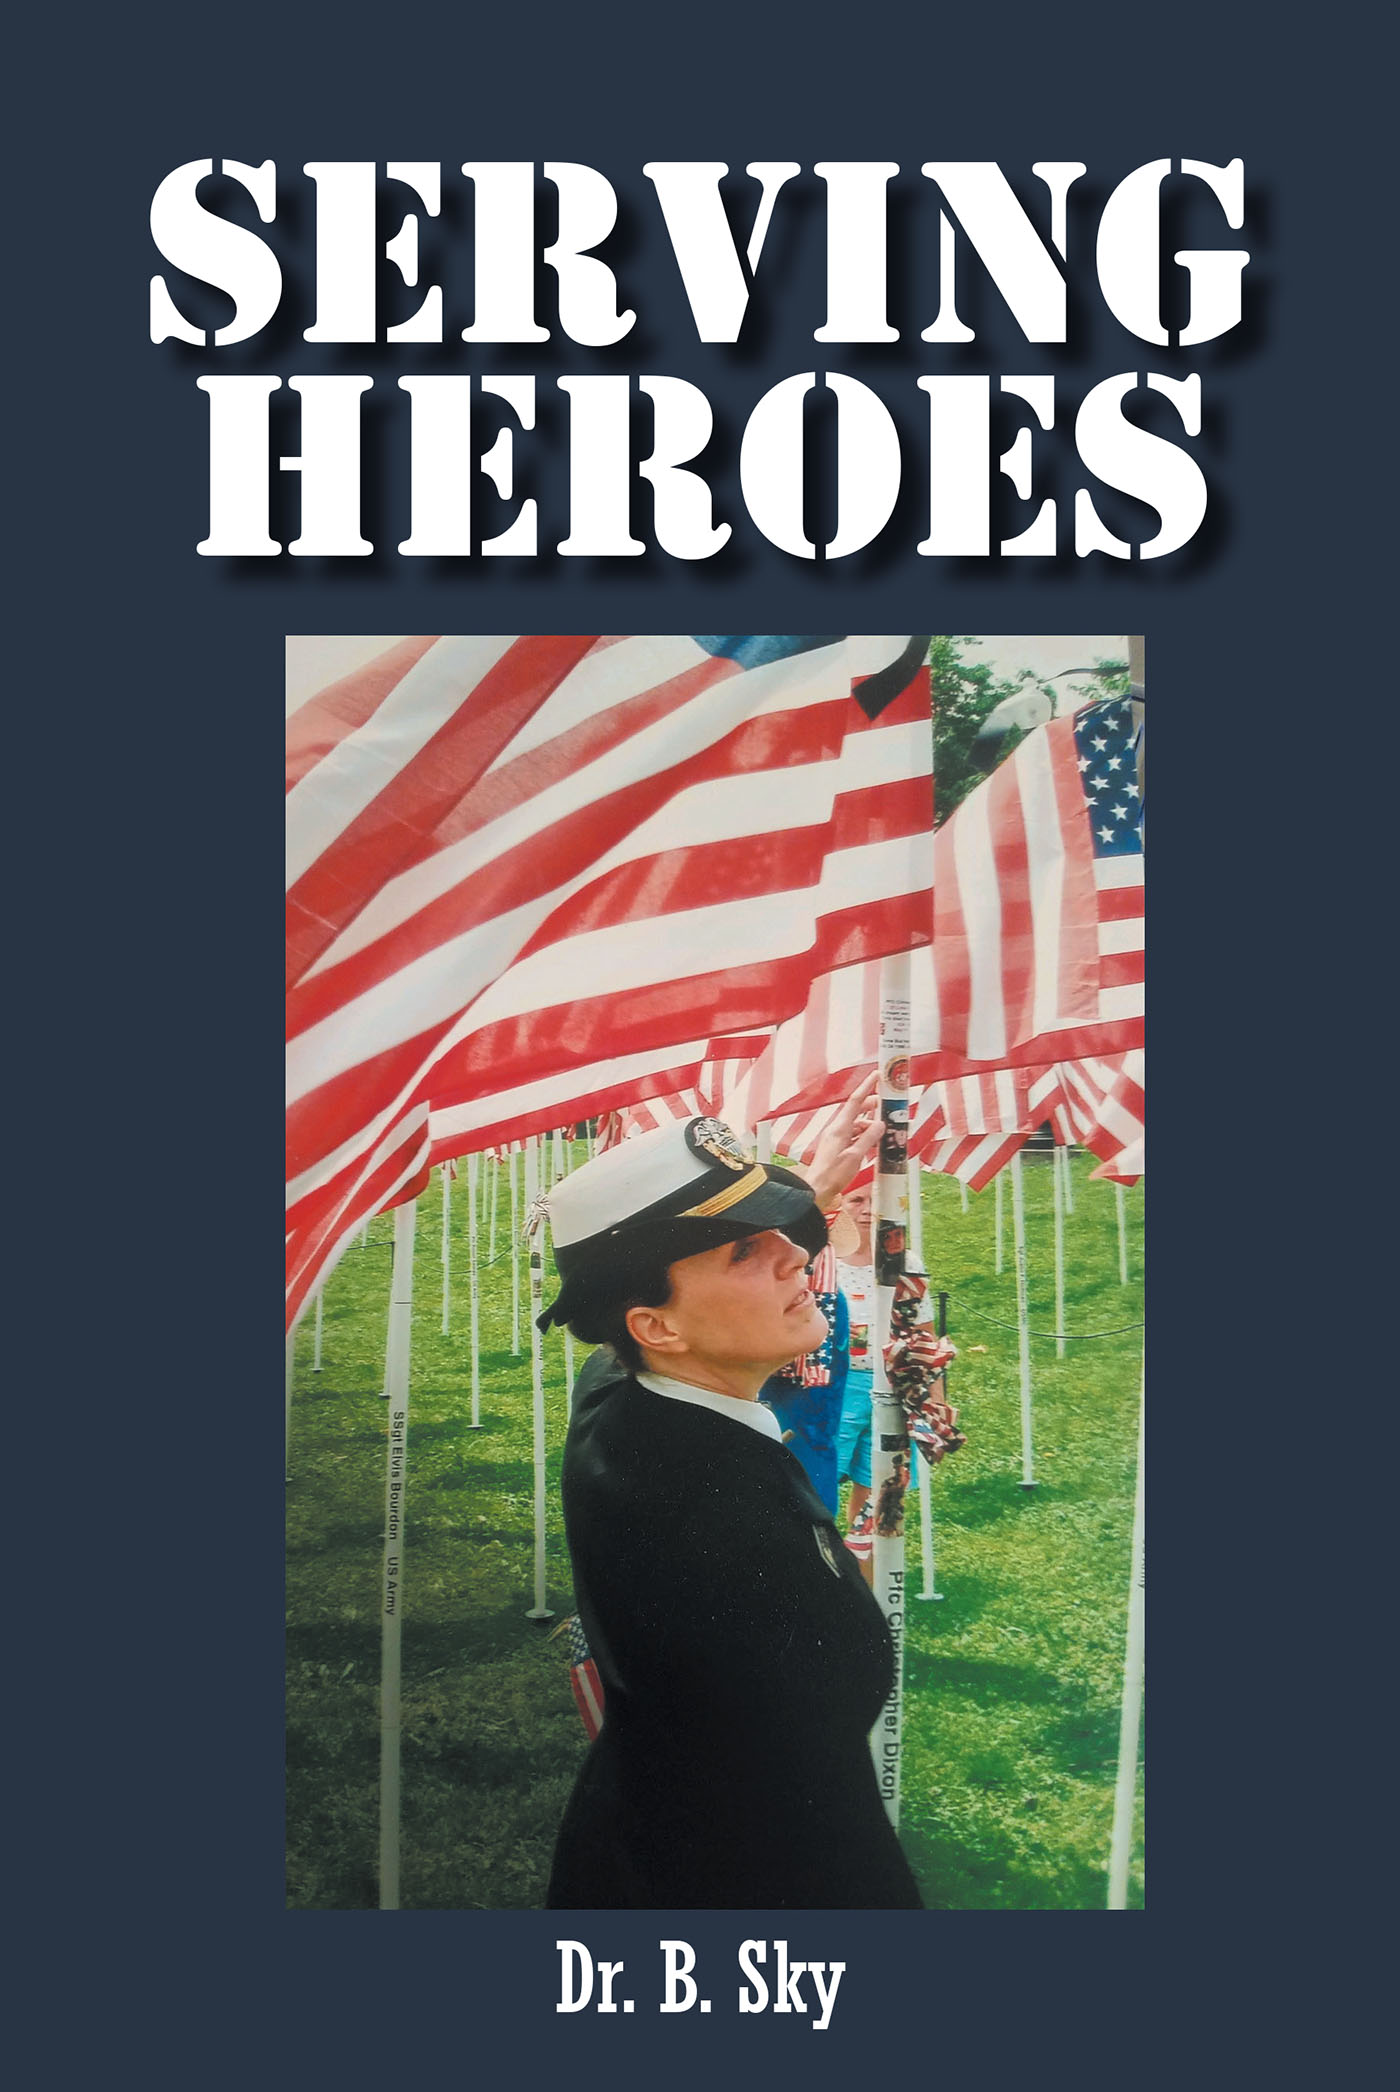 Dr. B. Sky’s Newly Released "Serving Heroes" is an Impactful Memoir That Shares the Realities of Serving in the Military and Serving Veterans in Need